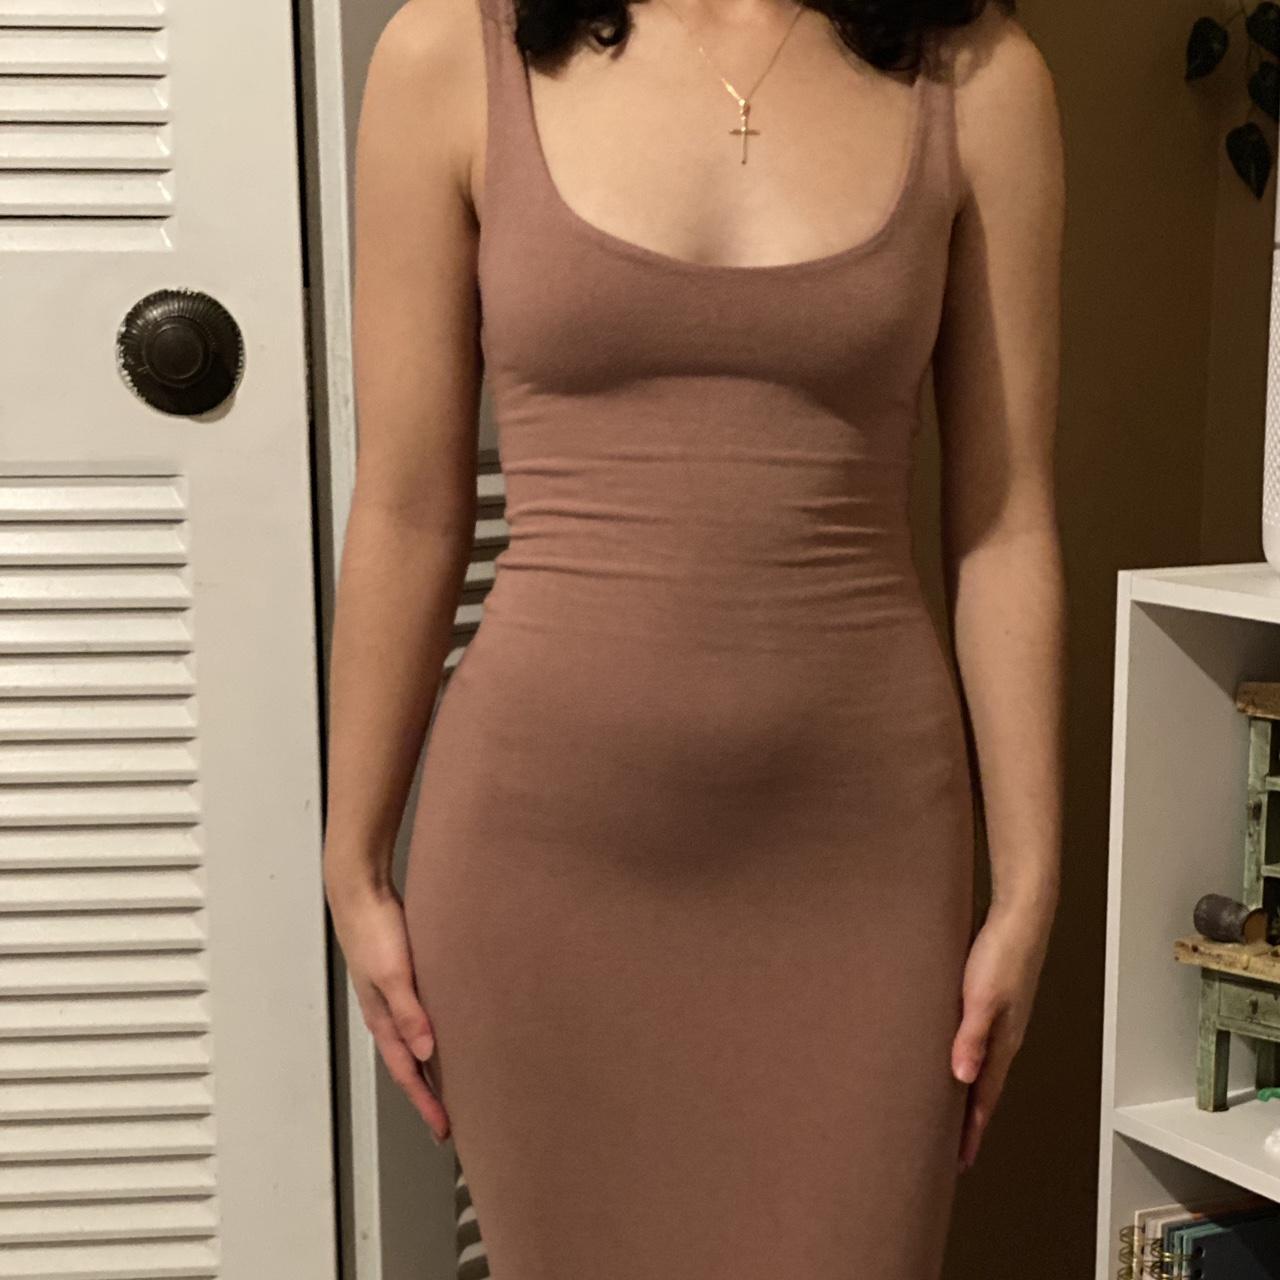 Naked wardrobe “the nw hourglass midi dress” in the